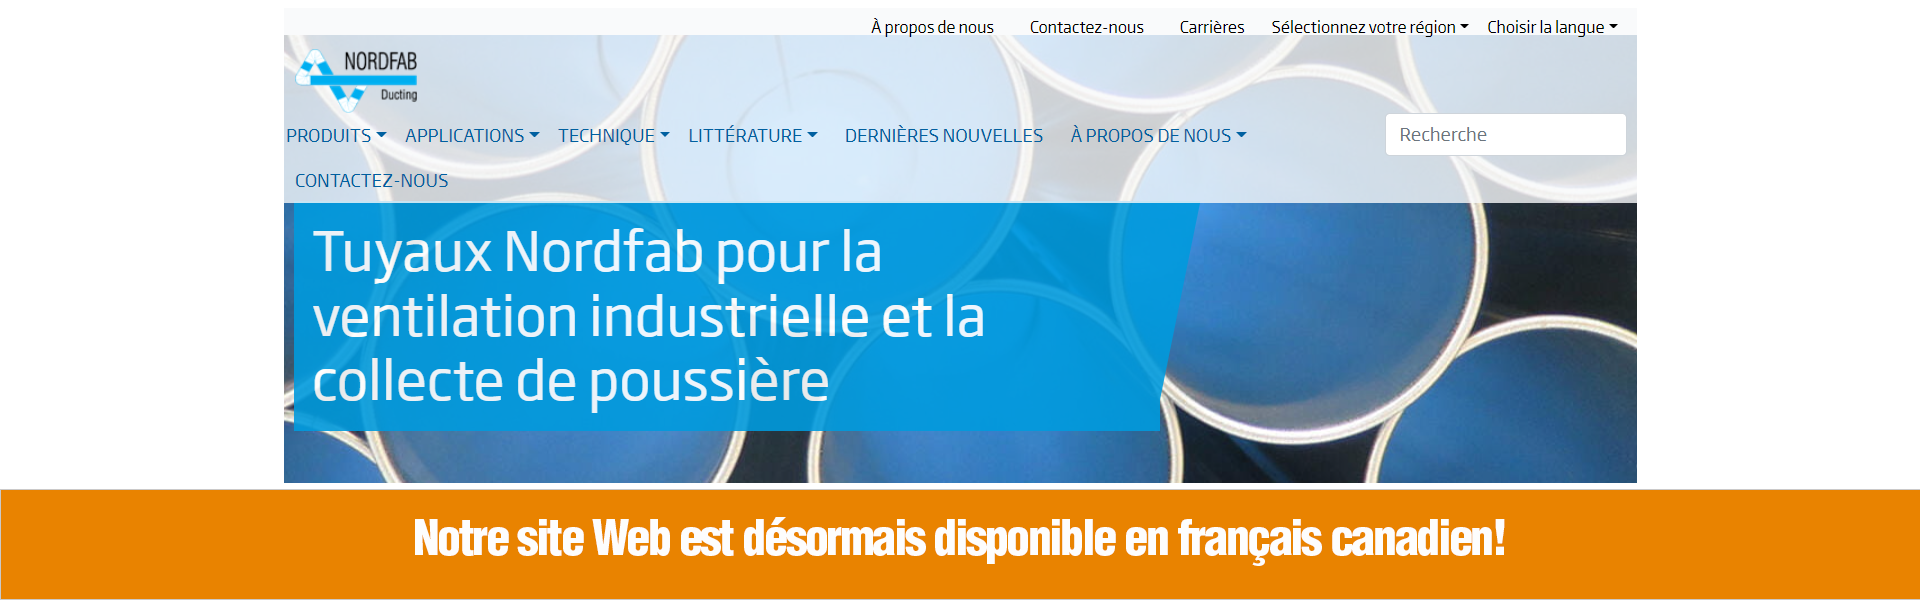 Nordfab Canadian French site launch